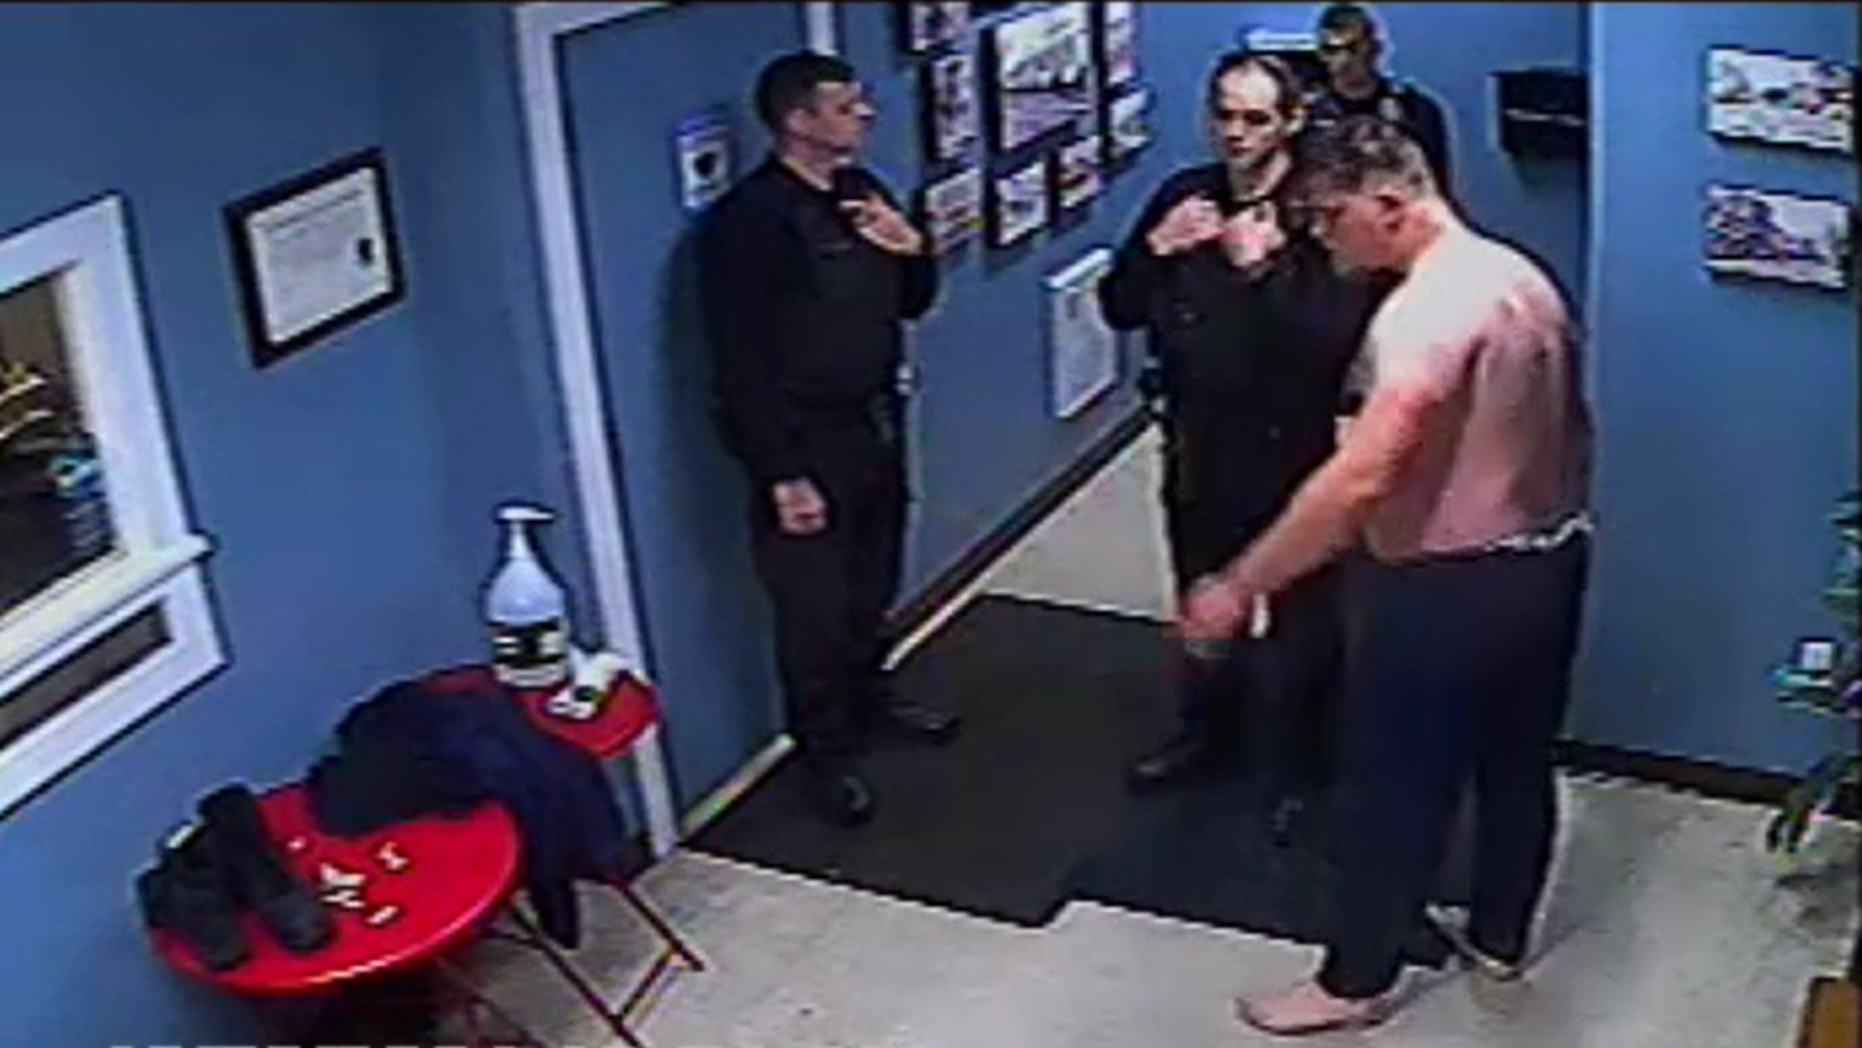 New York AG releases video showing man burst into flames after Taser discharge